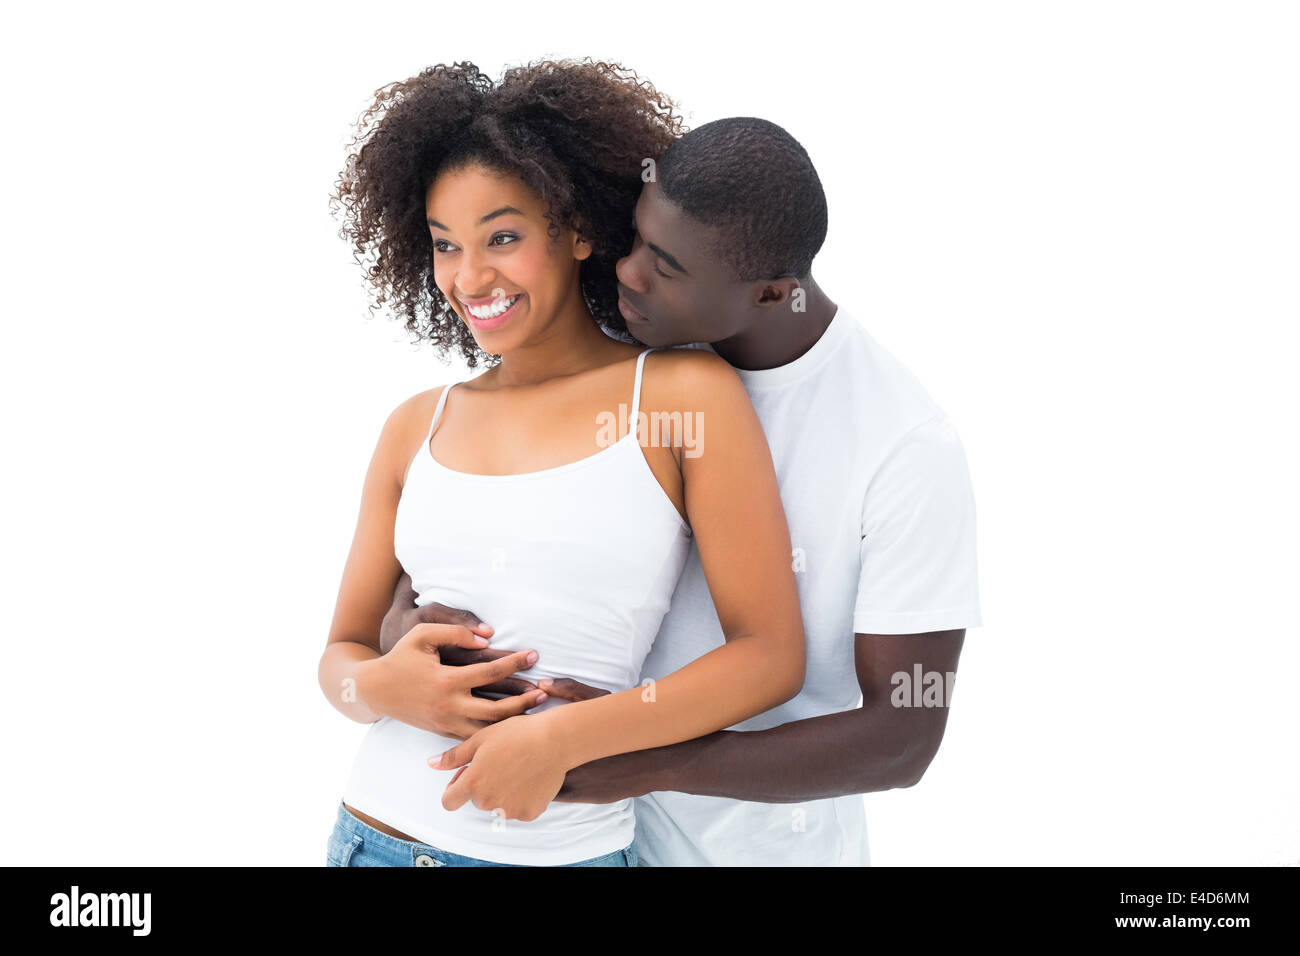 Casual couple embracing in matching white tops Stock Photo